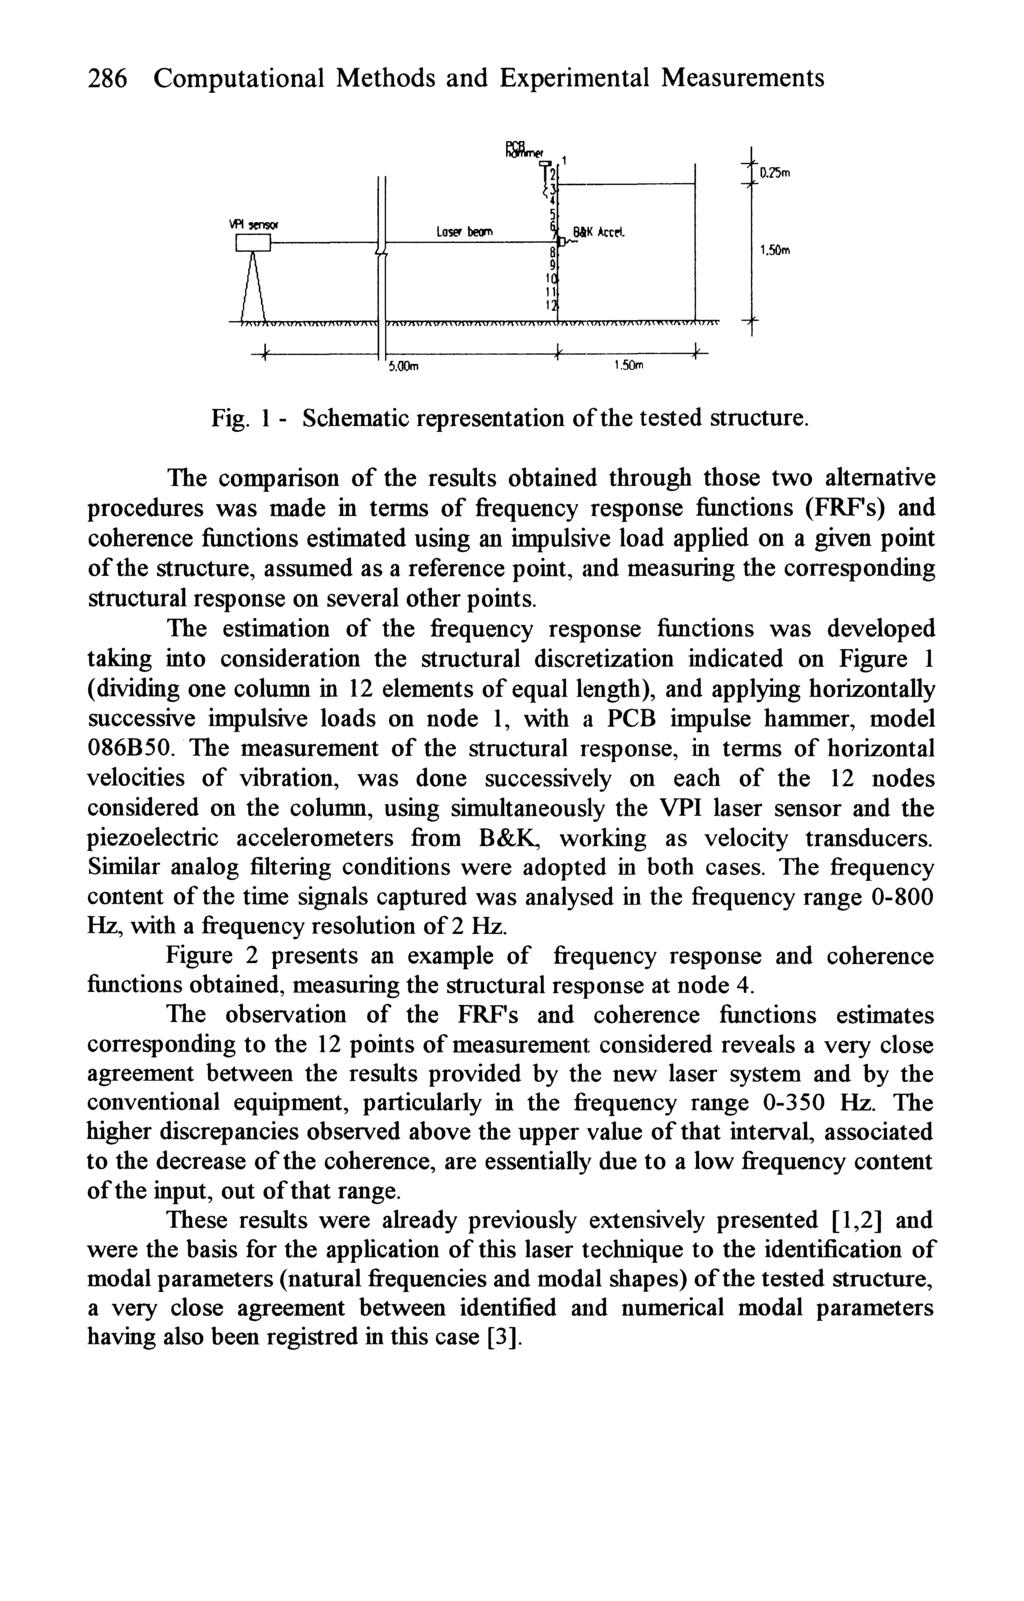 286 Computational Methods and Experimental Measurements VW jcnsor X ]f I5JU 1 1 Loser beam ^ 3~* BAK Accct. Y 8 9 10 11 12 0.25m Fig. 1 - Schematic representation of the tested structure.